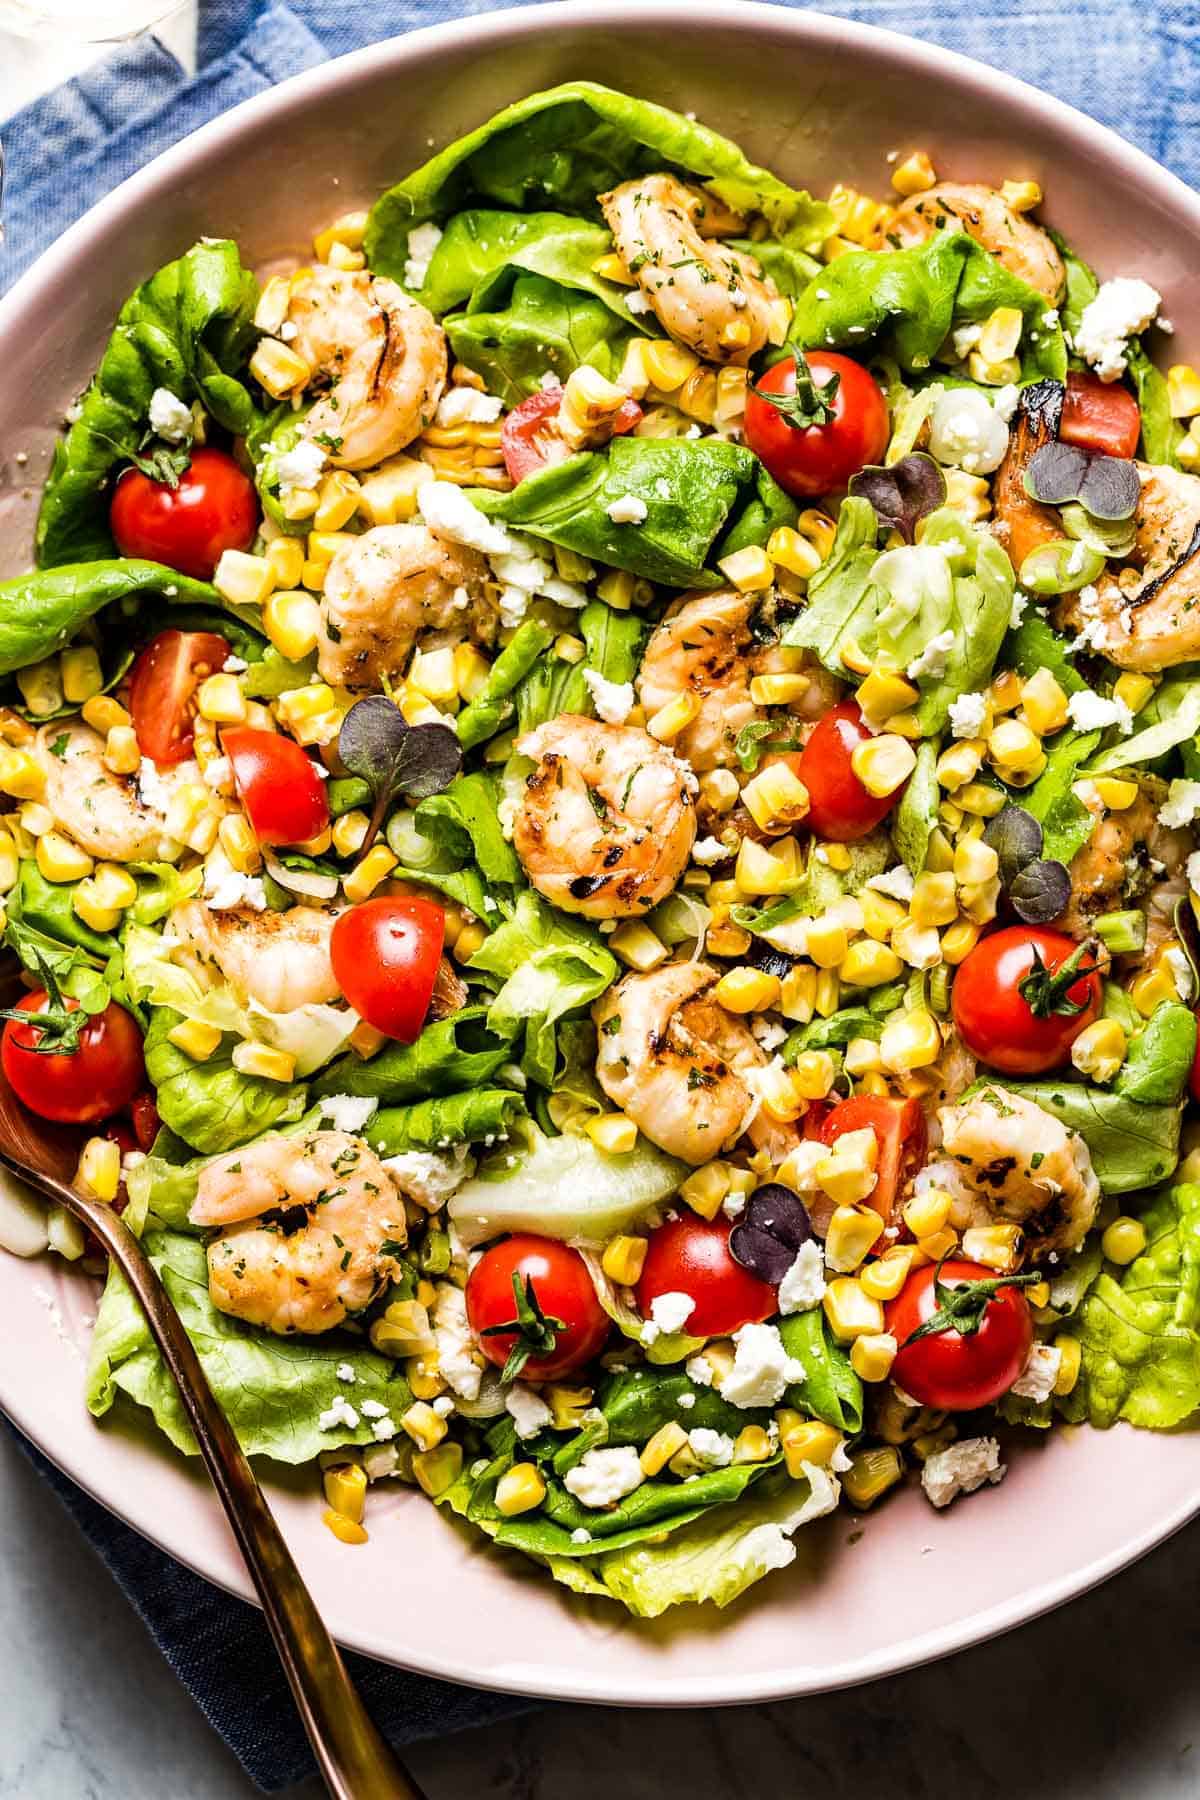 A bowl of shrimp and corn salad from the top view from a close up view